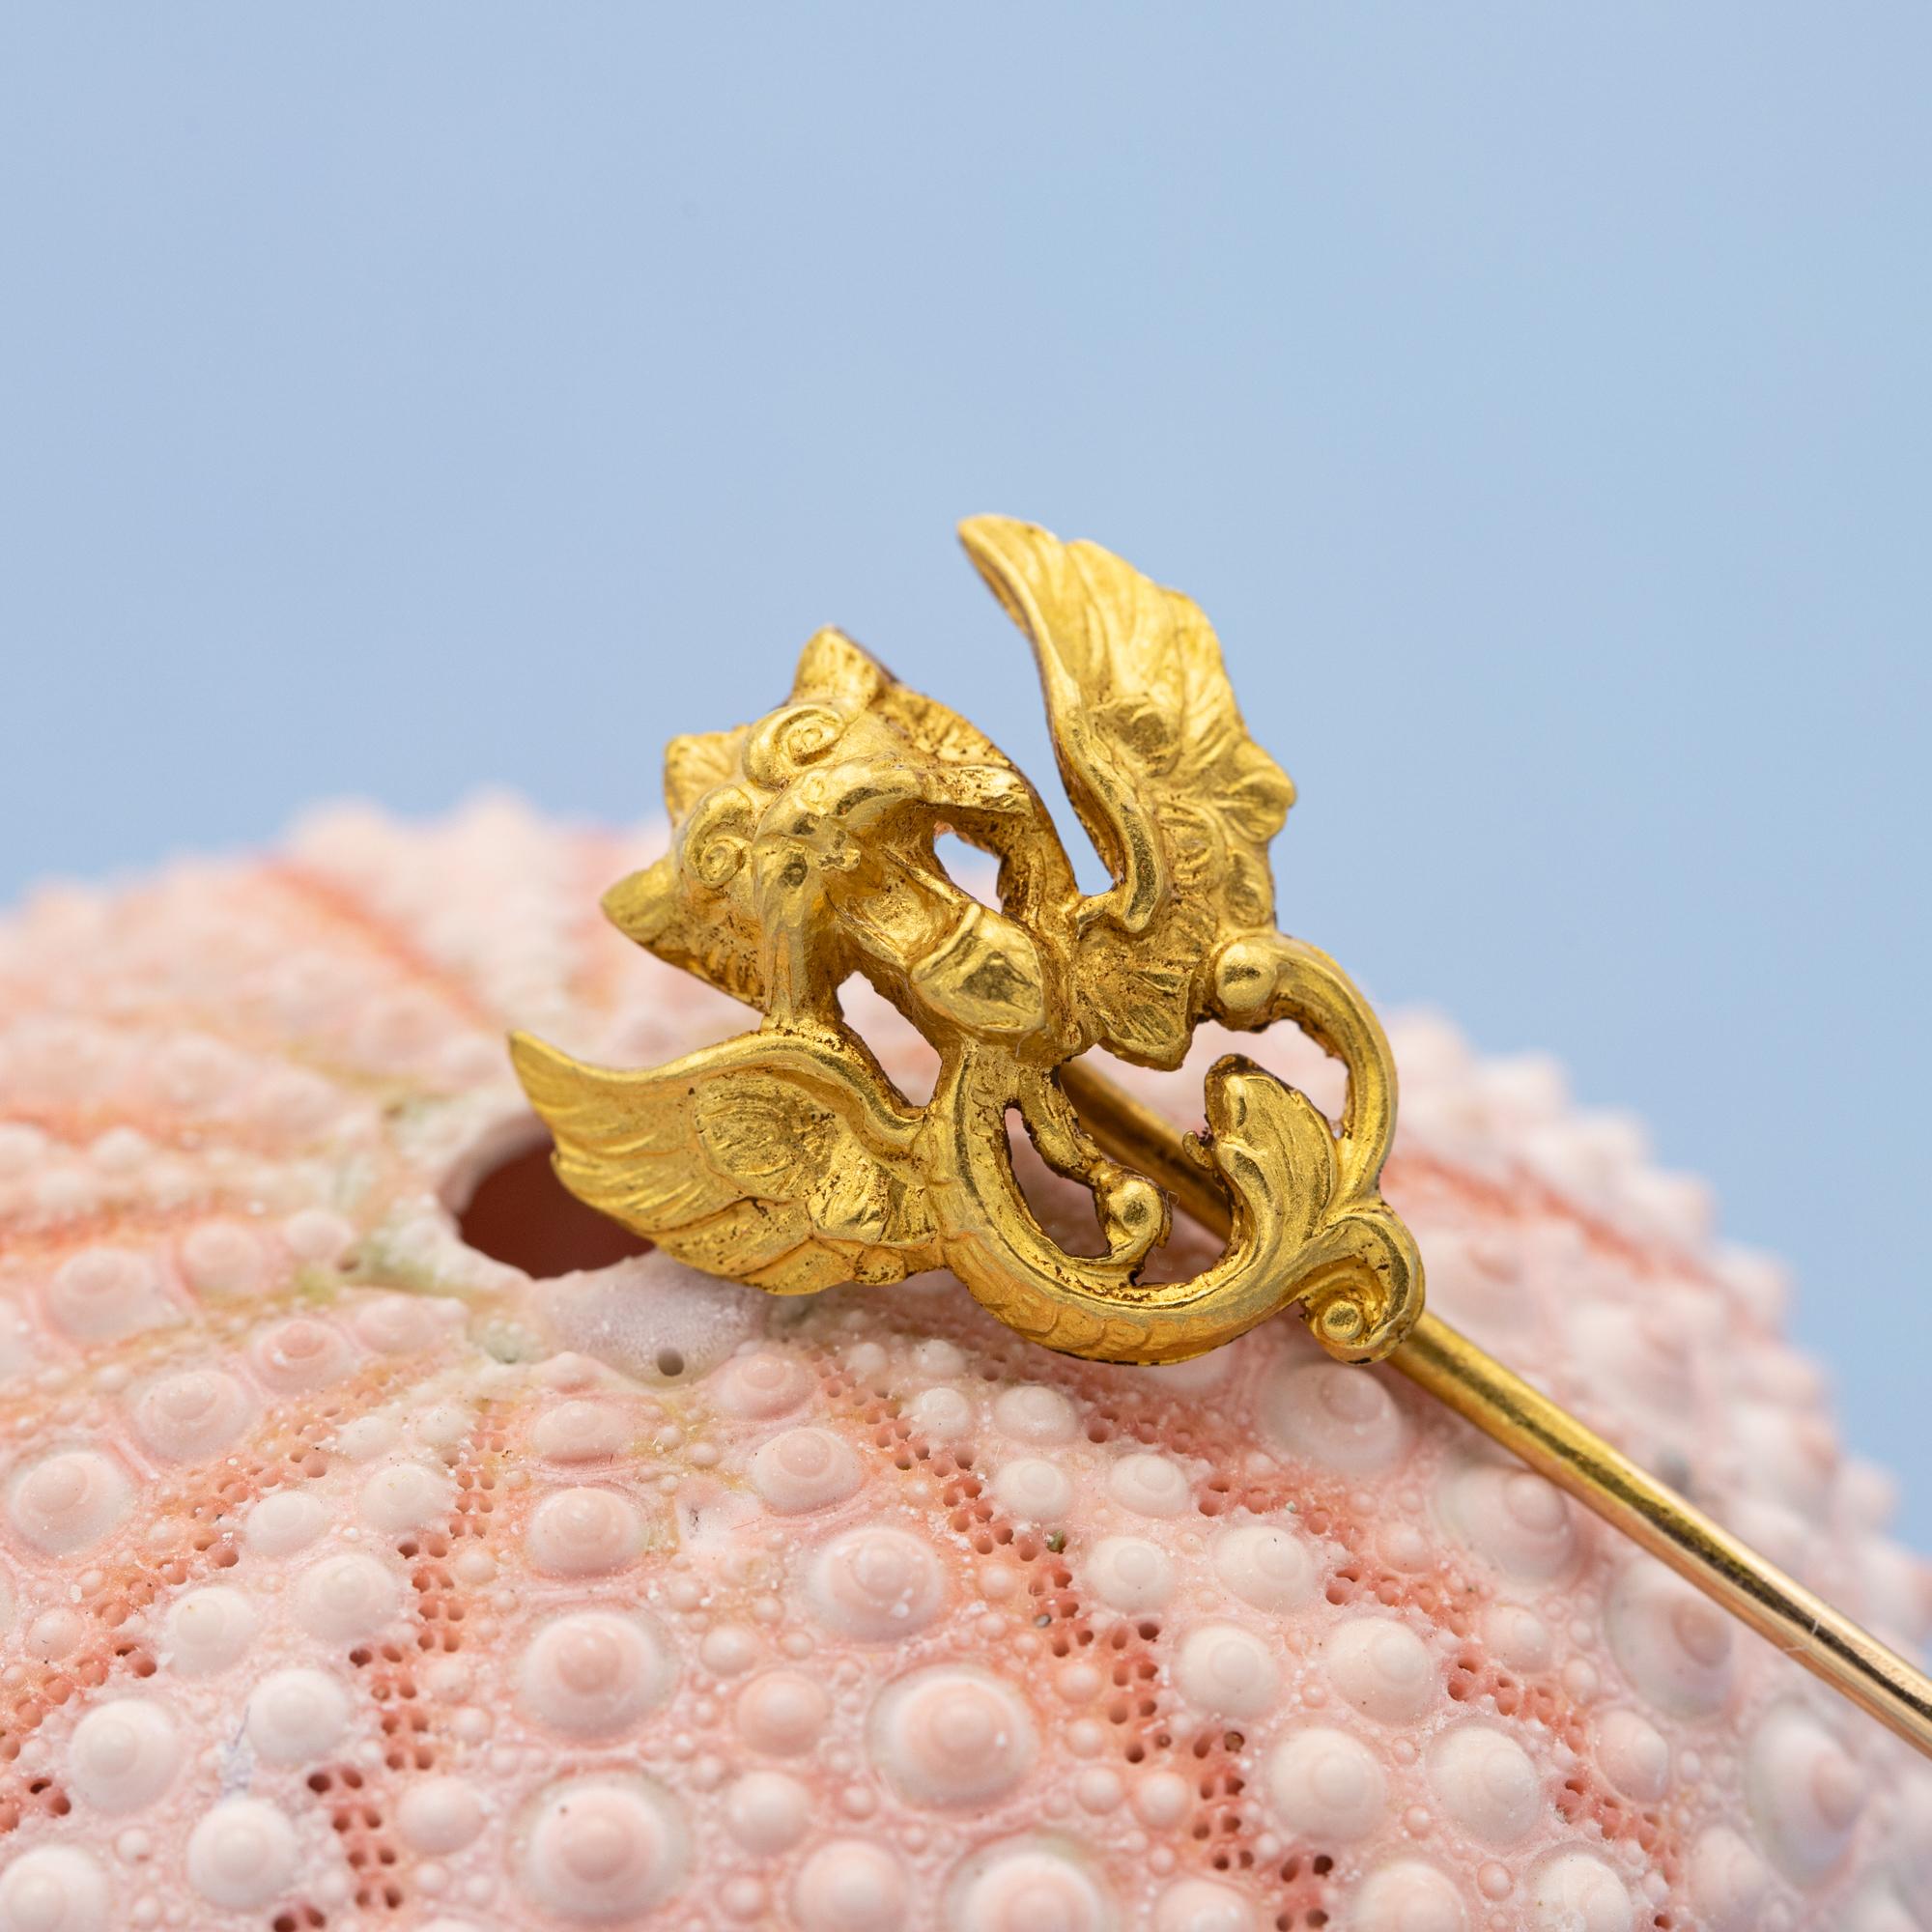 For sale is this stunning 18 carat gold Victorian dragon pin. This dragon / Eagle / Griffin is very detailed and breathtaking in real life. On top of that is this stickpin marked with a French eagle head. 

Queen Victoria, who reigned during the